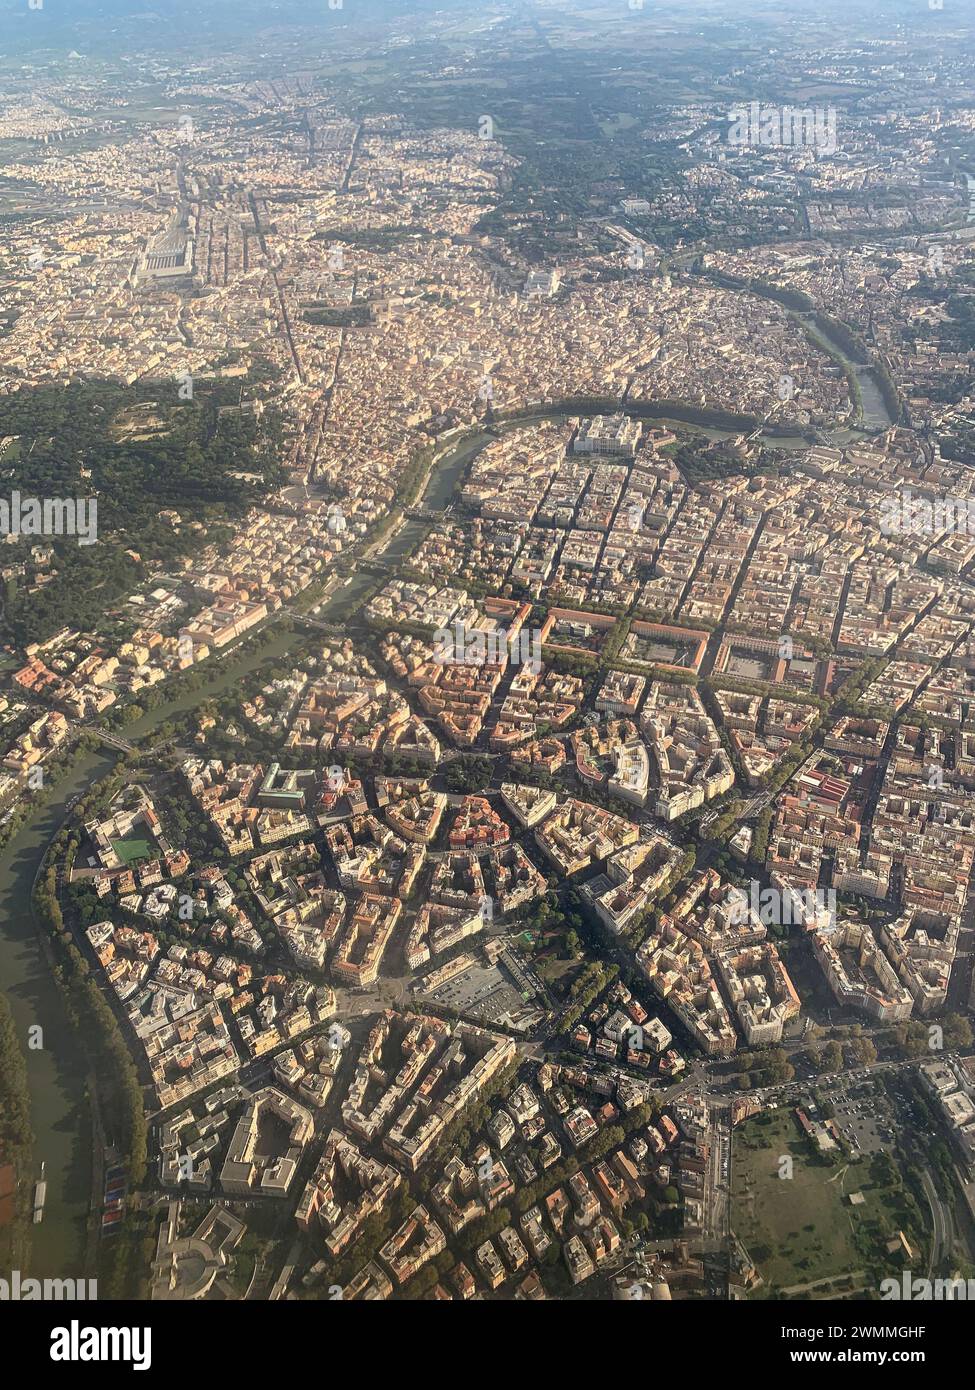 Rome city center and Tiber river. Aeriel view. Rome, Italy Stock Photo